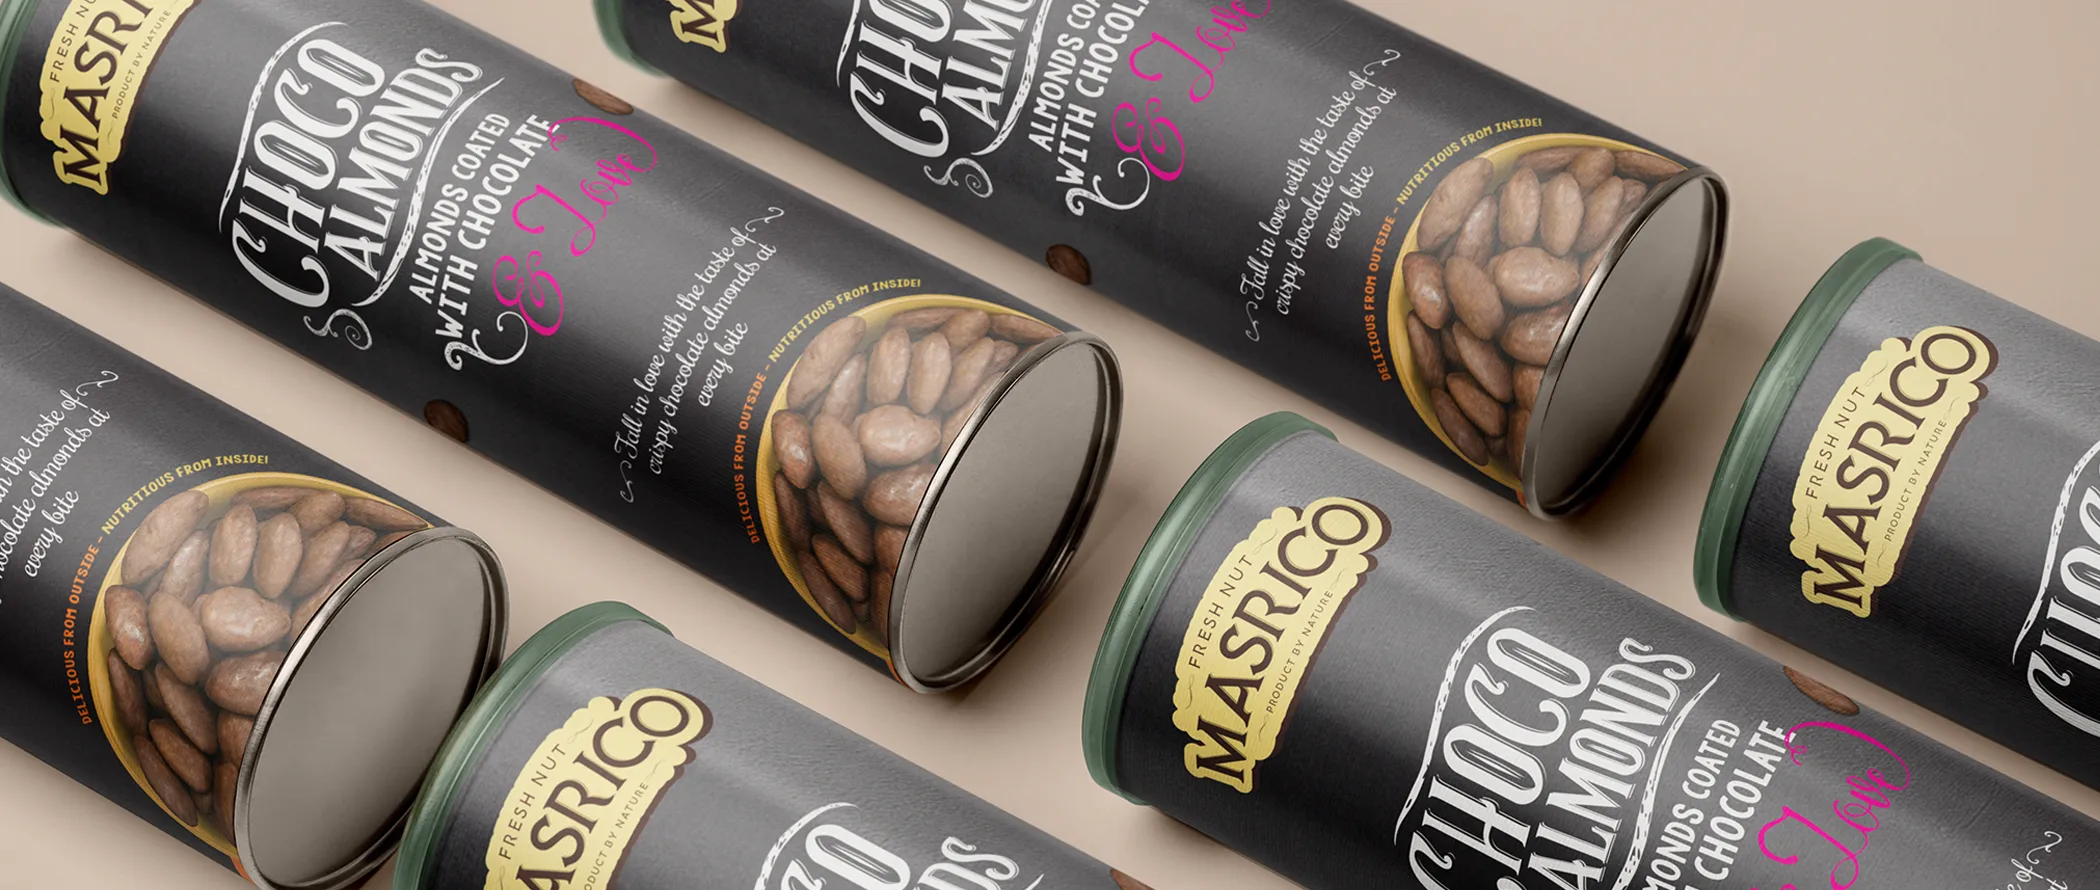 MAsrico paper tube packaging design7copy